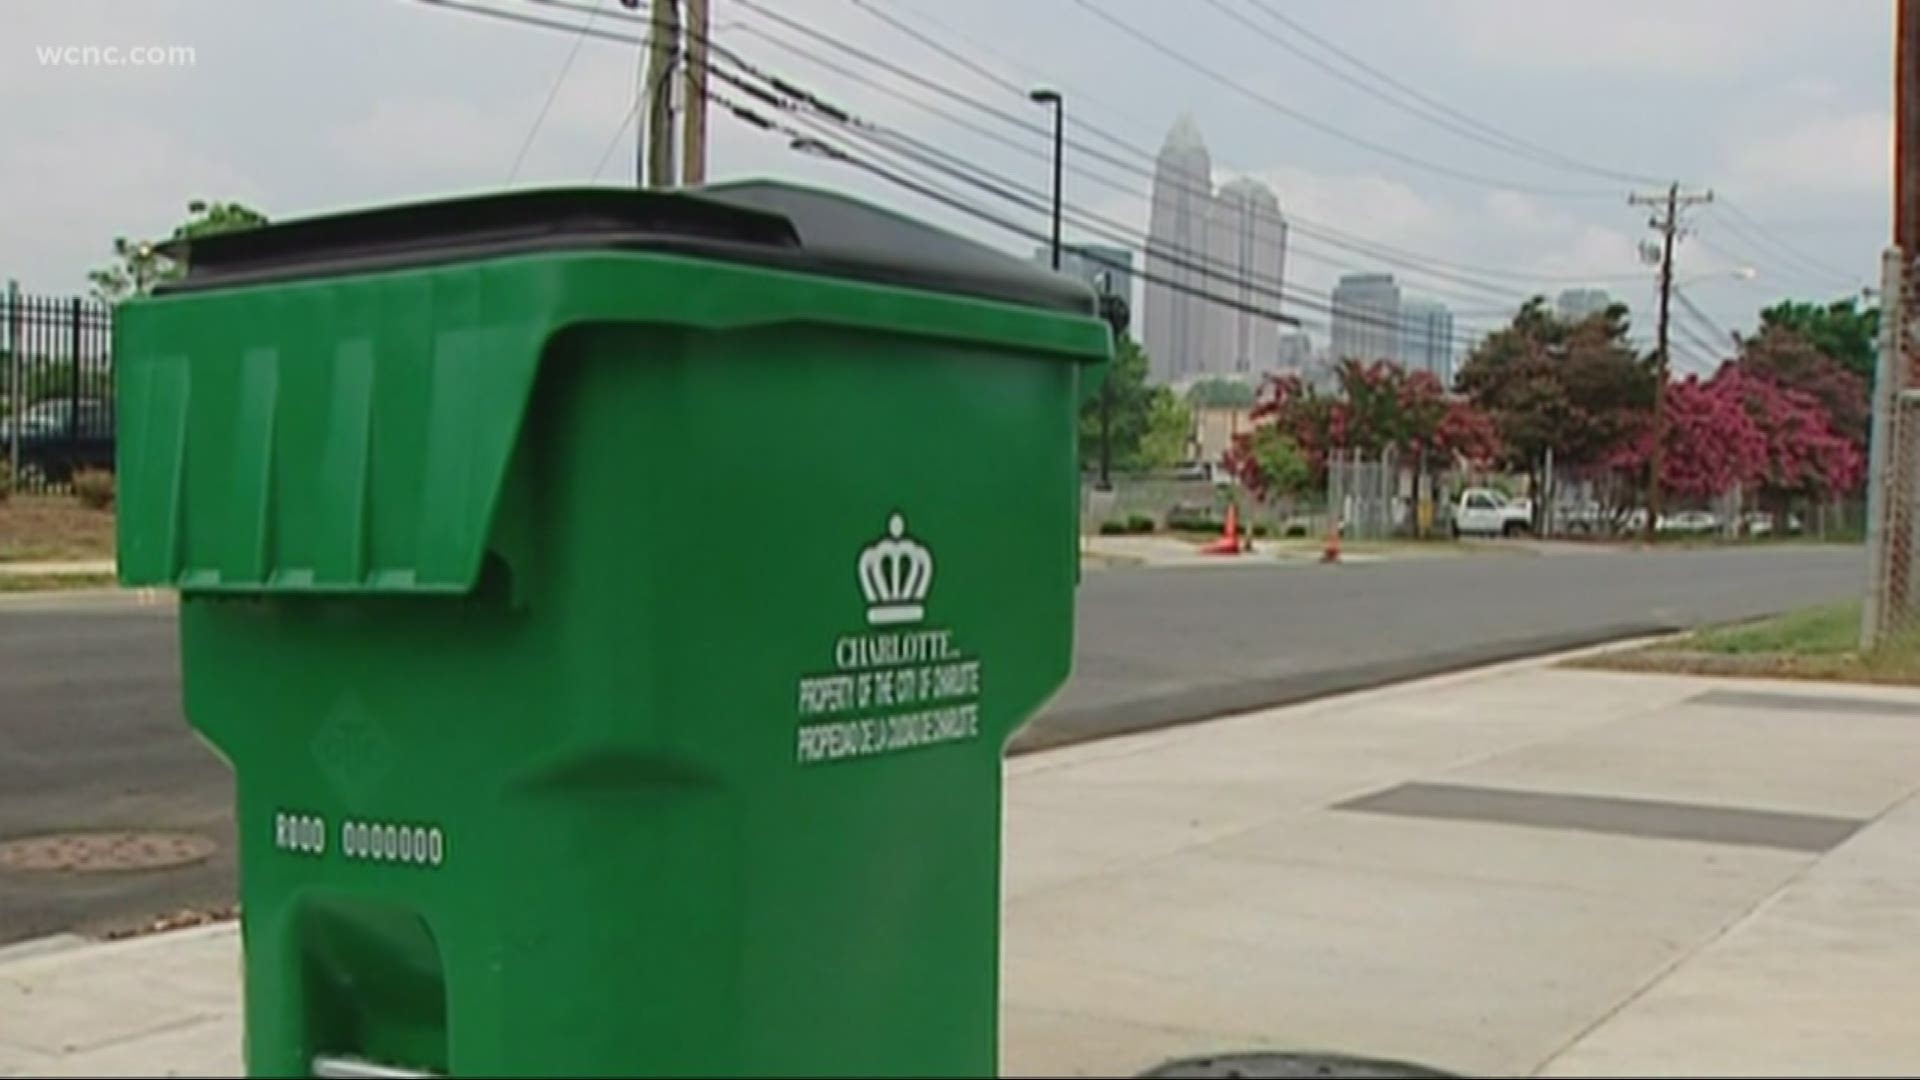 Charlotte is cracking down on what people put in their recycling bins. But a Defenders investigation found an even bigger problem.